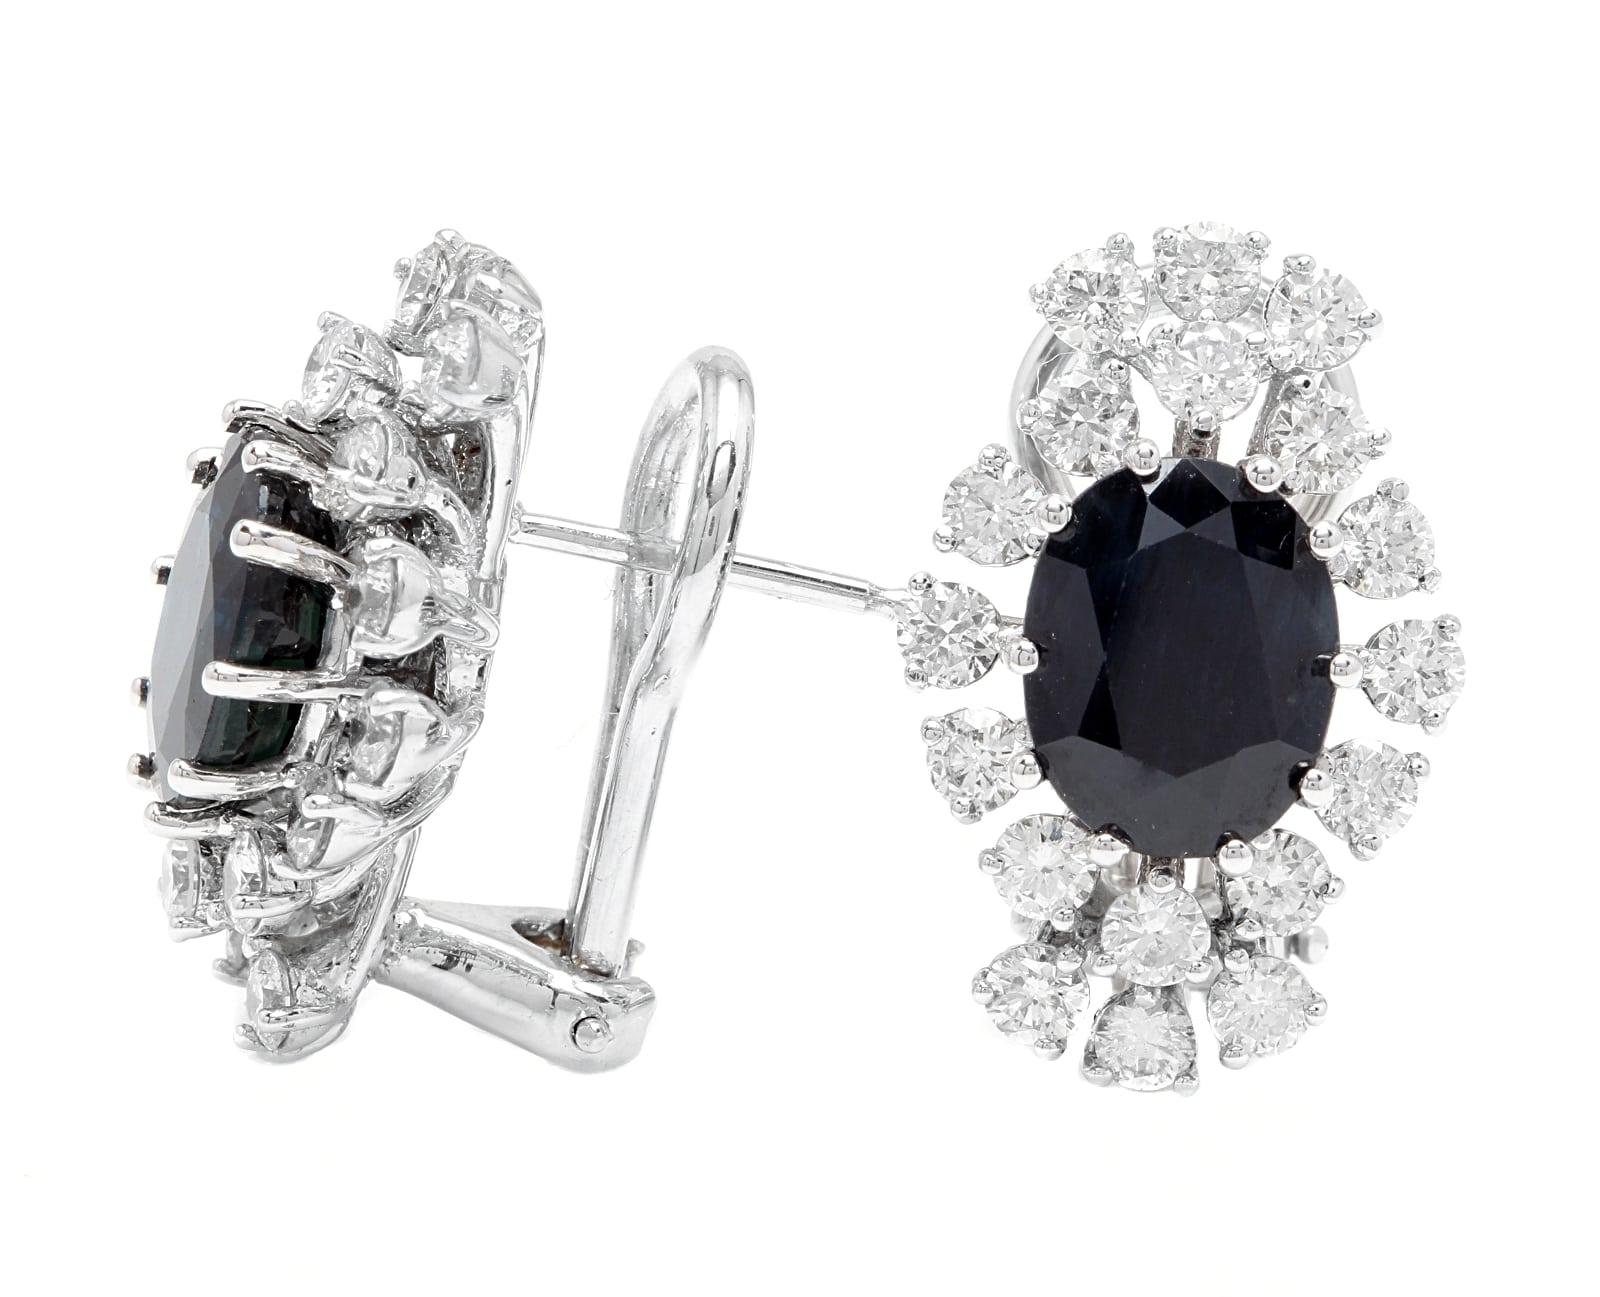 Exquisite 8.00 Carats Natural Sapphire and Diamond 14K Solid White Gold Earrings

Amazing looking piece!

Total Natural Round Cut White Diamonds Weight: Approx. 2.00 Carats (color G-H / Clarity SI1-SI2)

Total Natural Oval Cut Sapphires Weight: